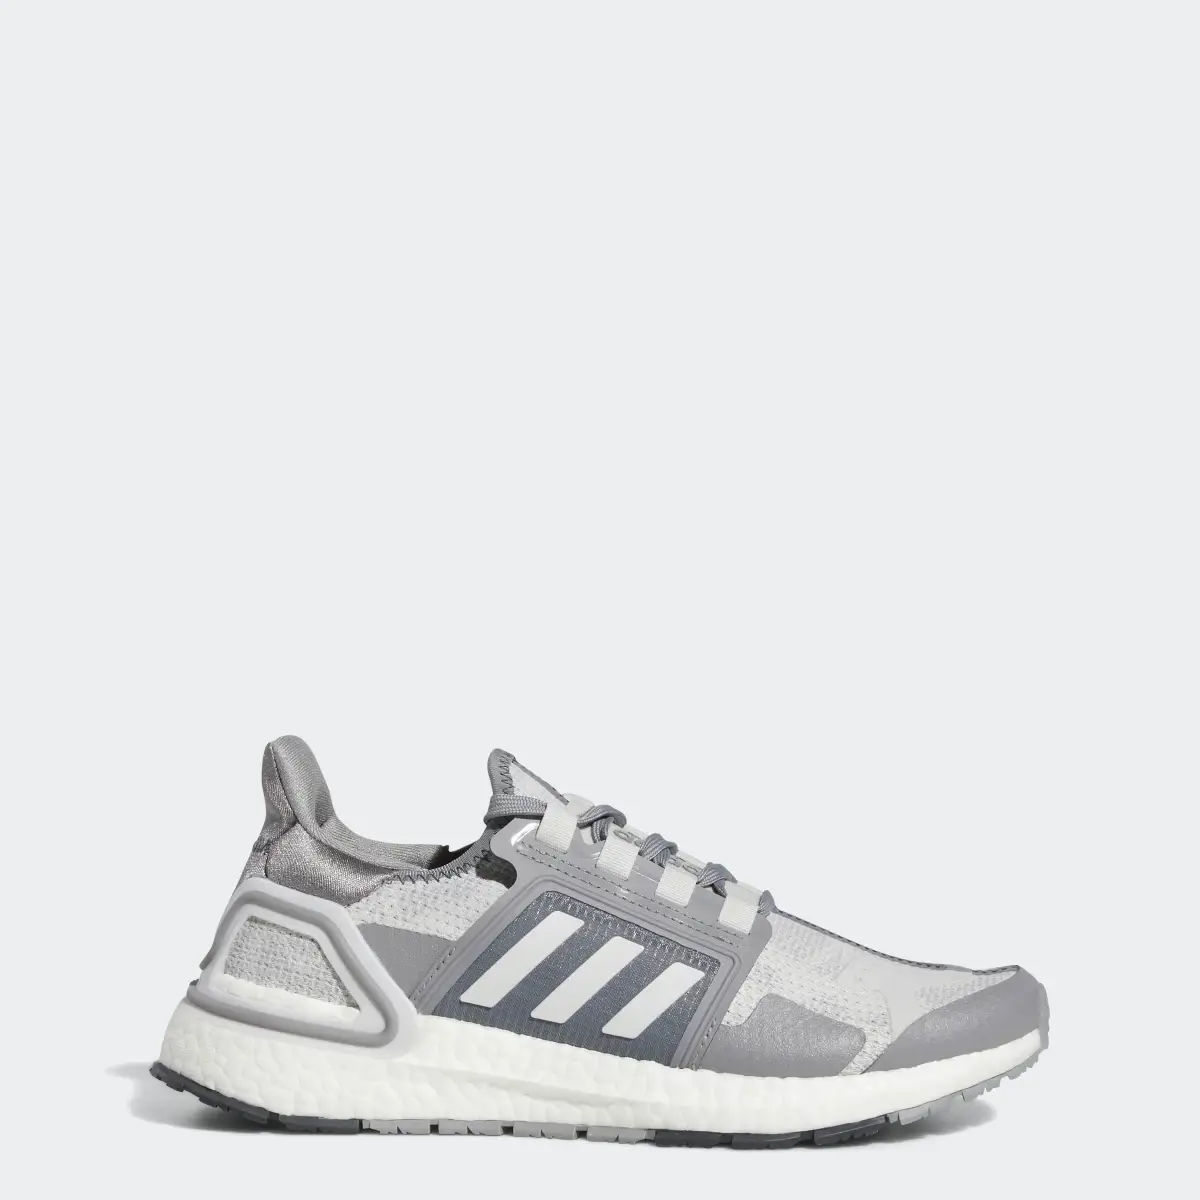 Adidas Ultraboost DNA City Explorer Outdoor Trail Running Sportswear Lifestyle Shoes. 1